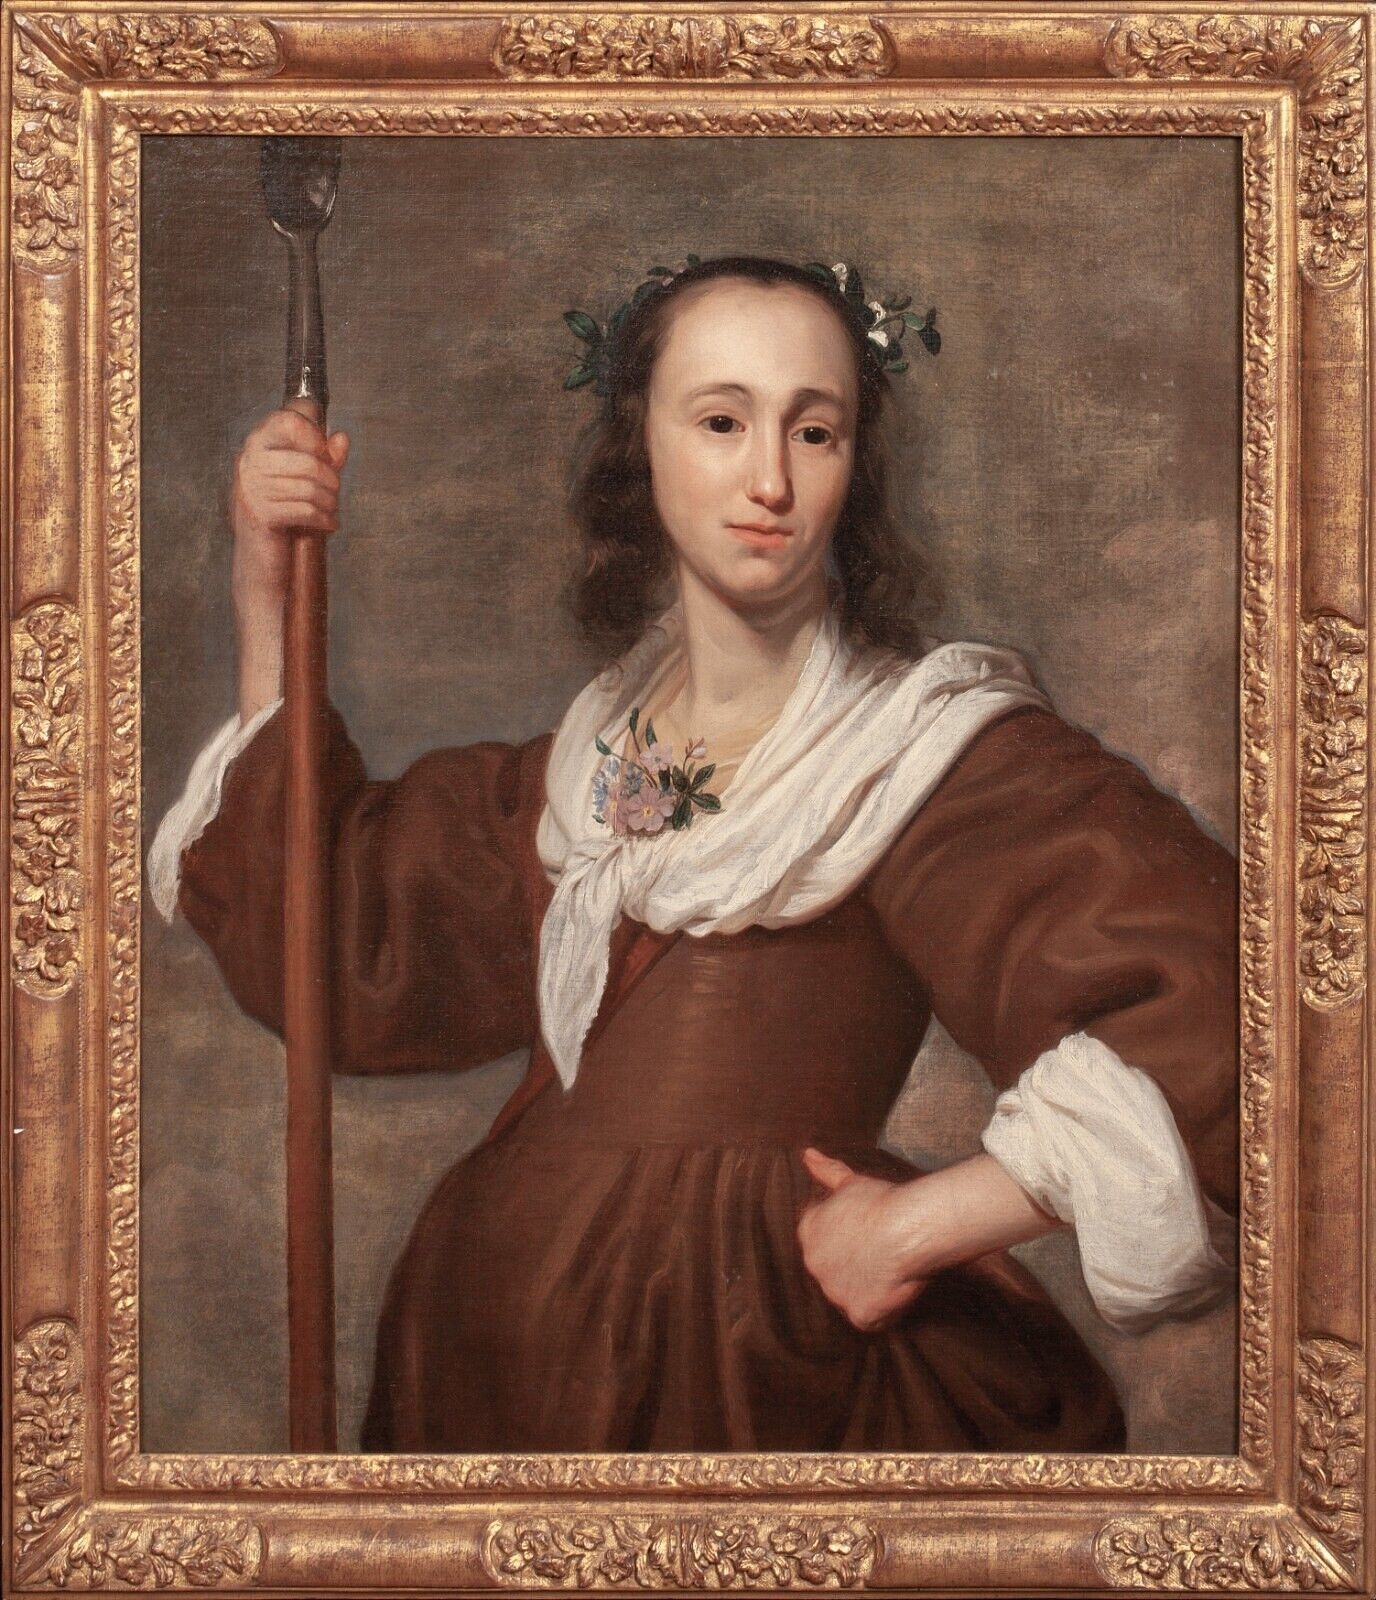 PORTRAIT OF A LADY AS DIANA OIL PAINTING by Dutch School, 17th century